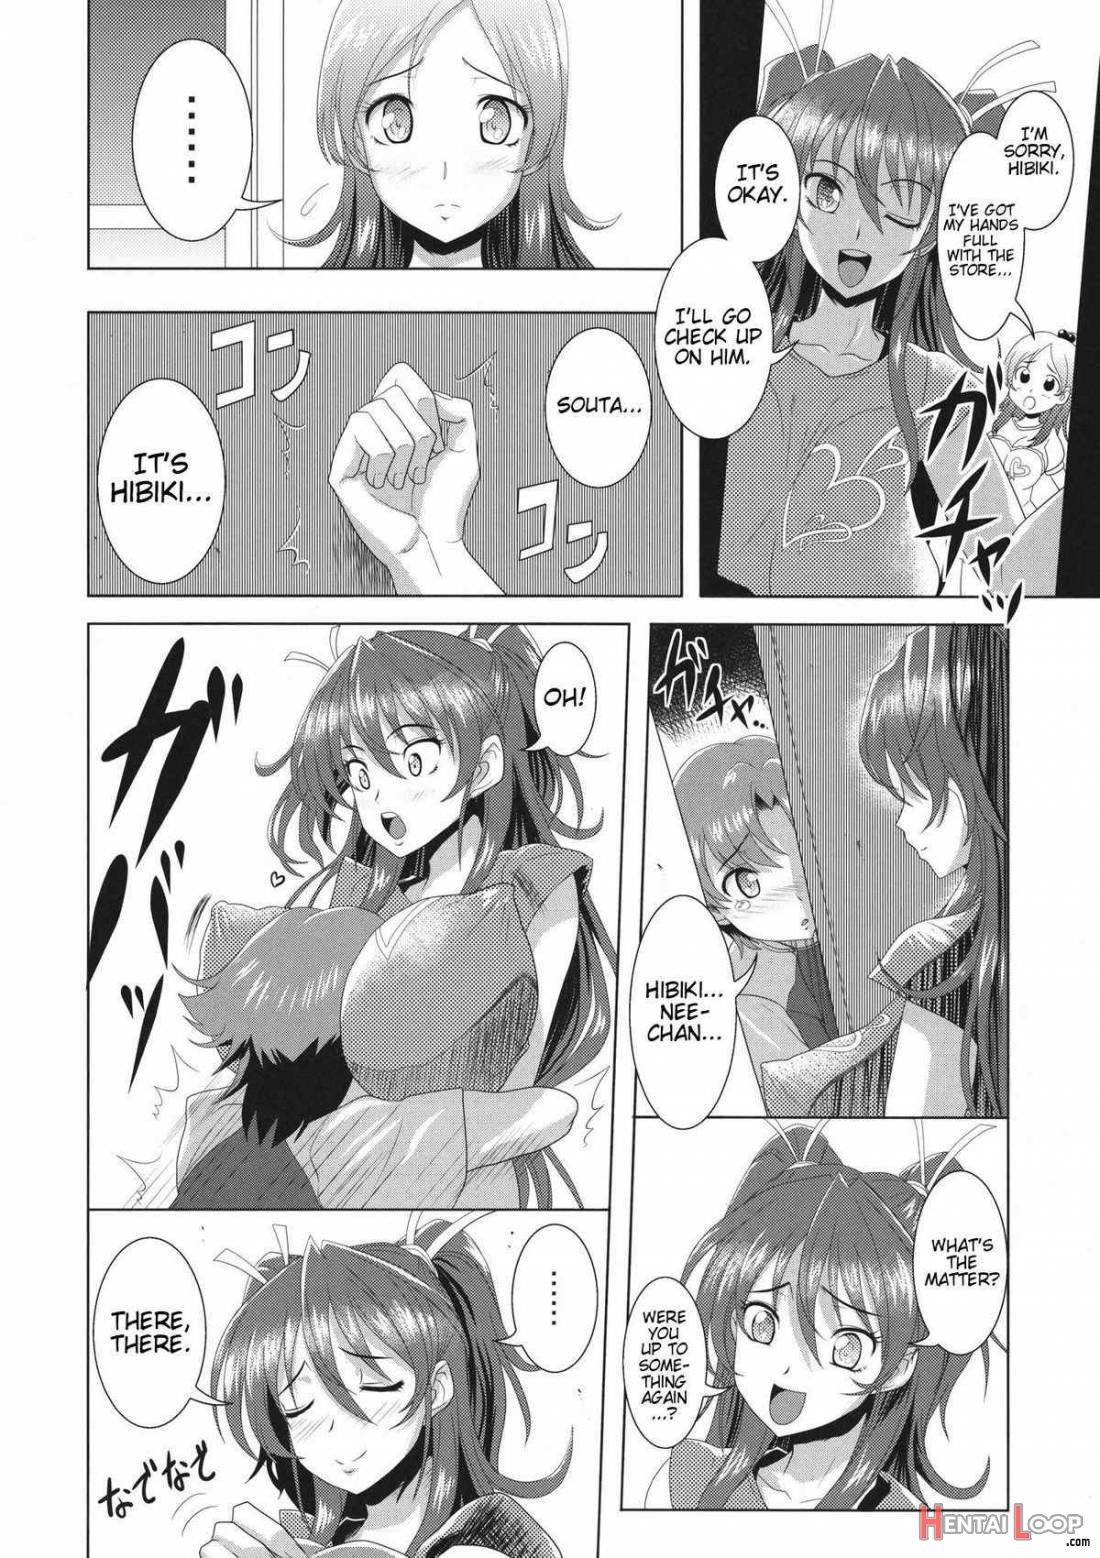 Suite Oppai page 3